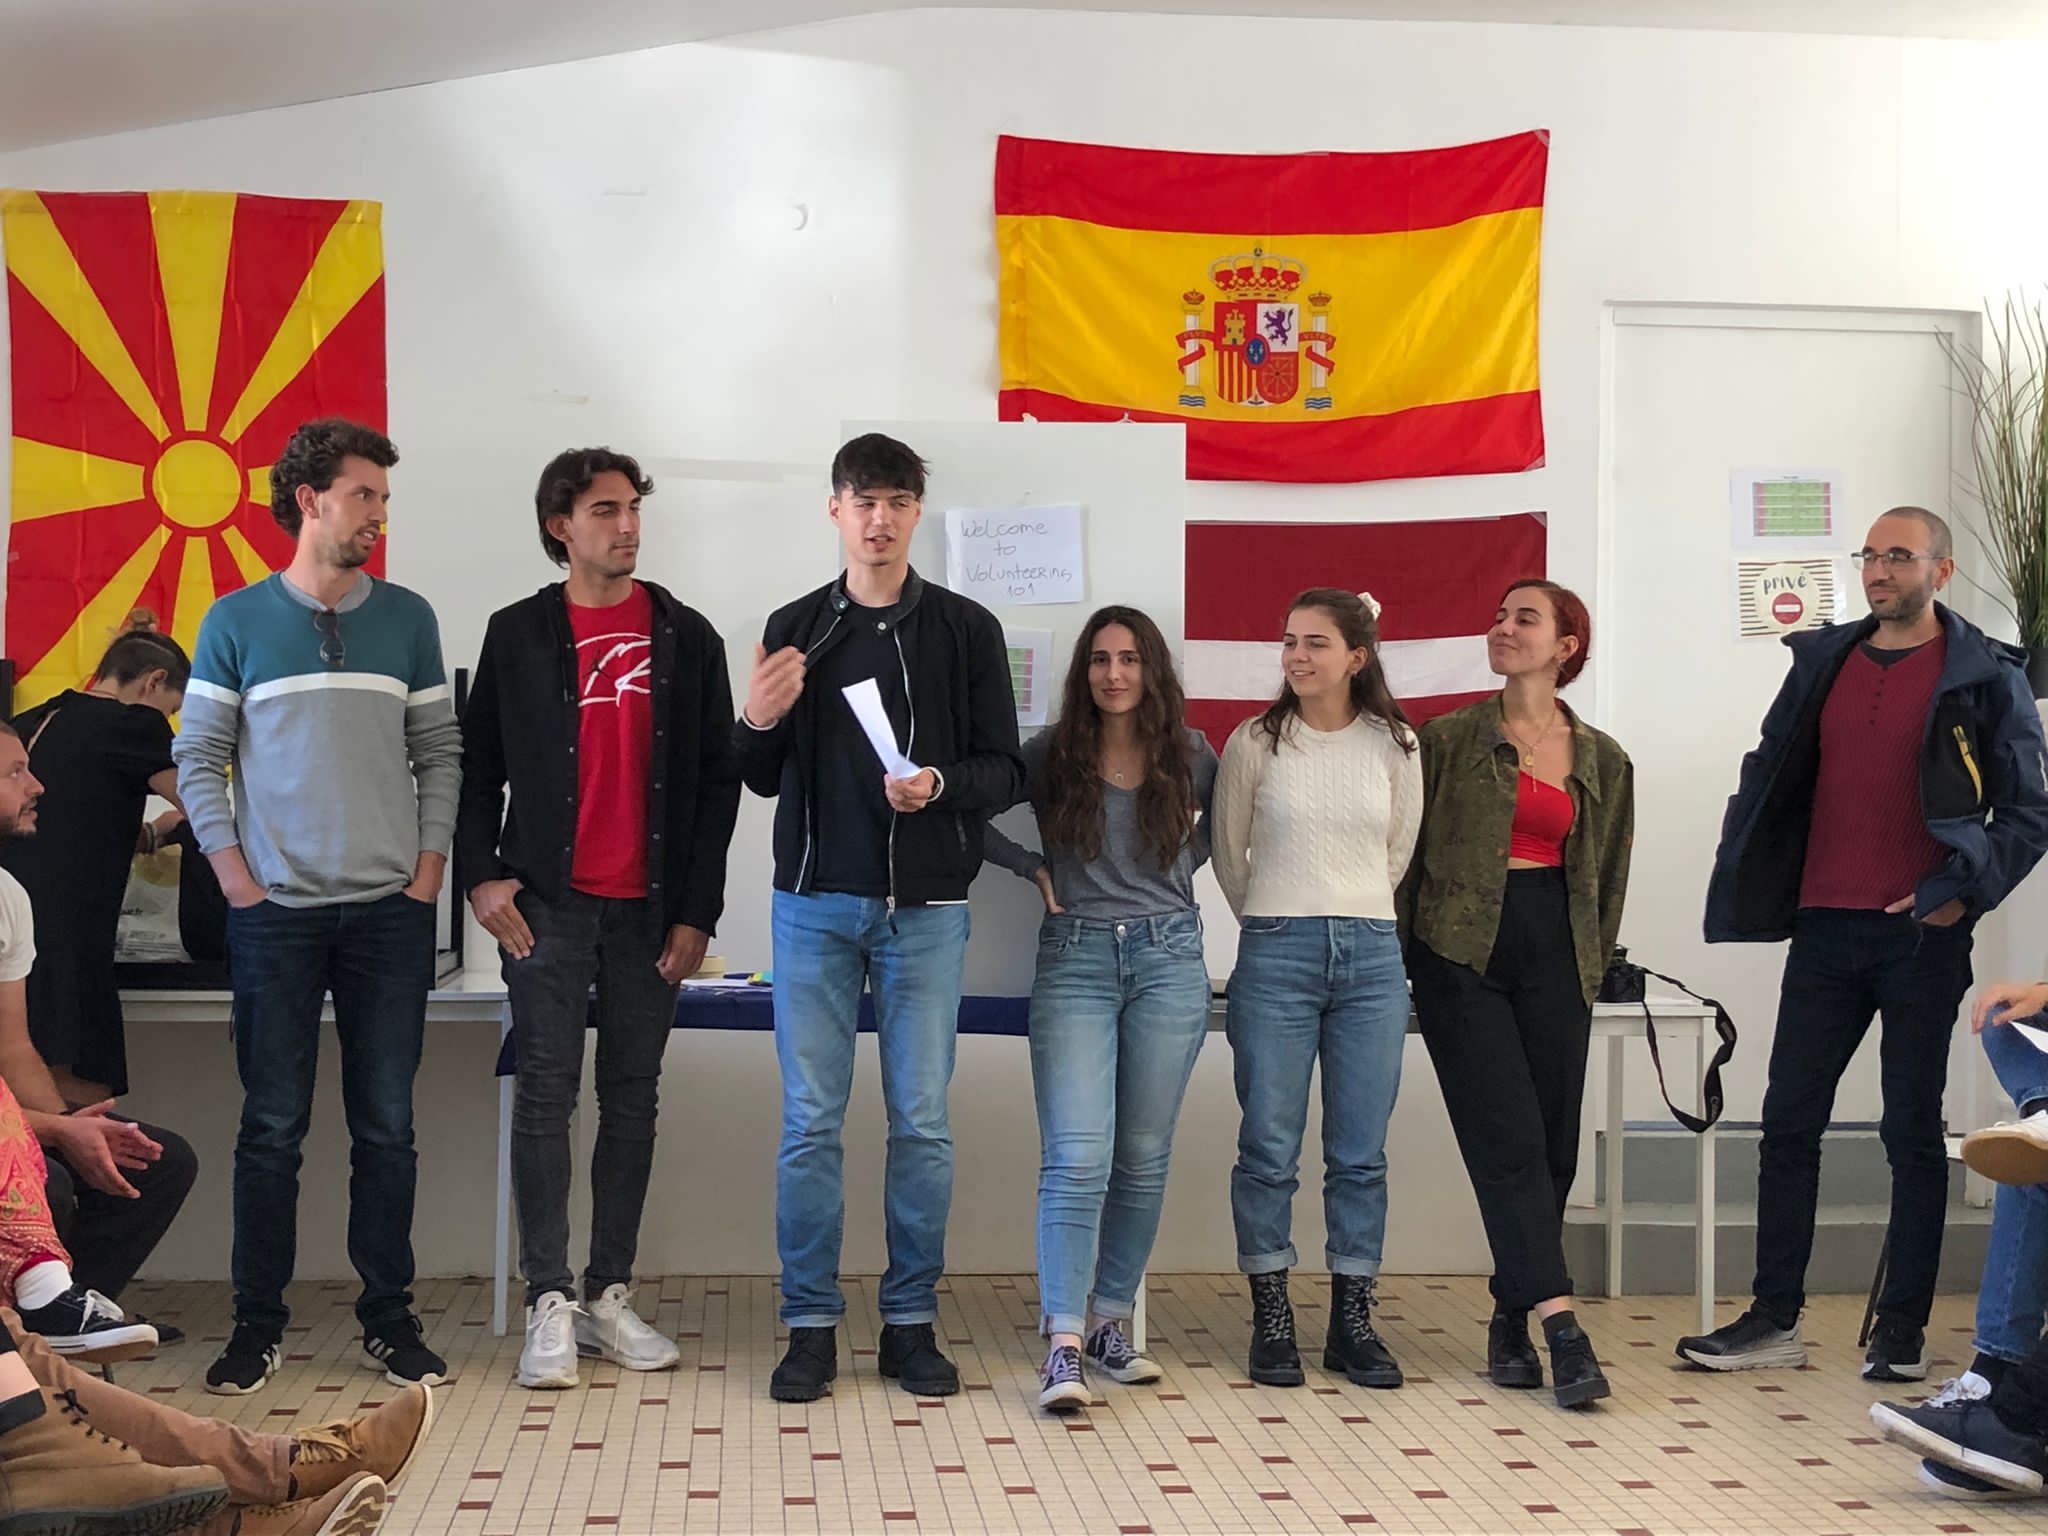 Read more about the article (English) Volunteering 101, Saint-Georges-d’Oléron, France